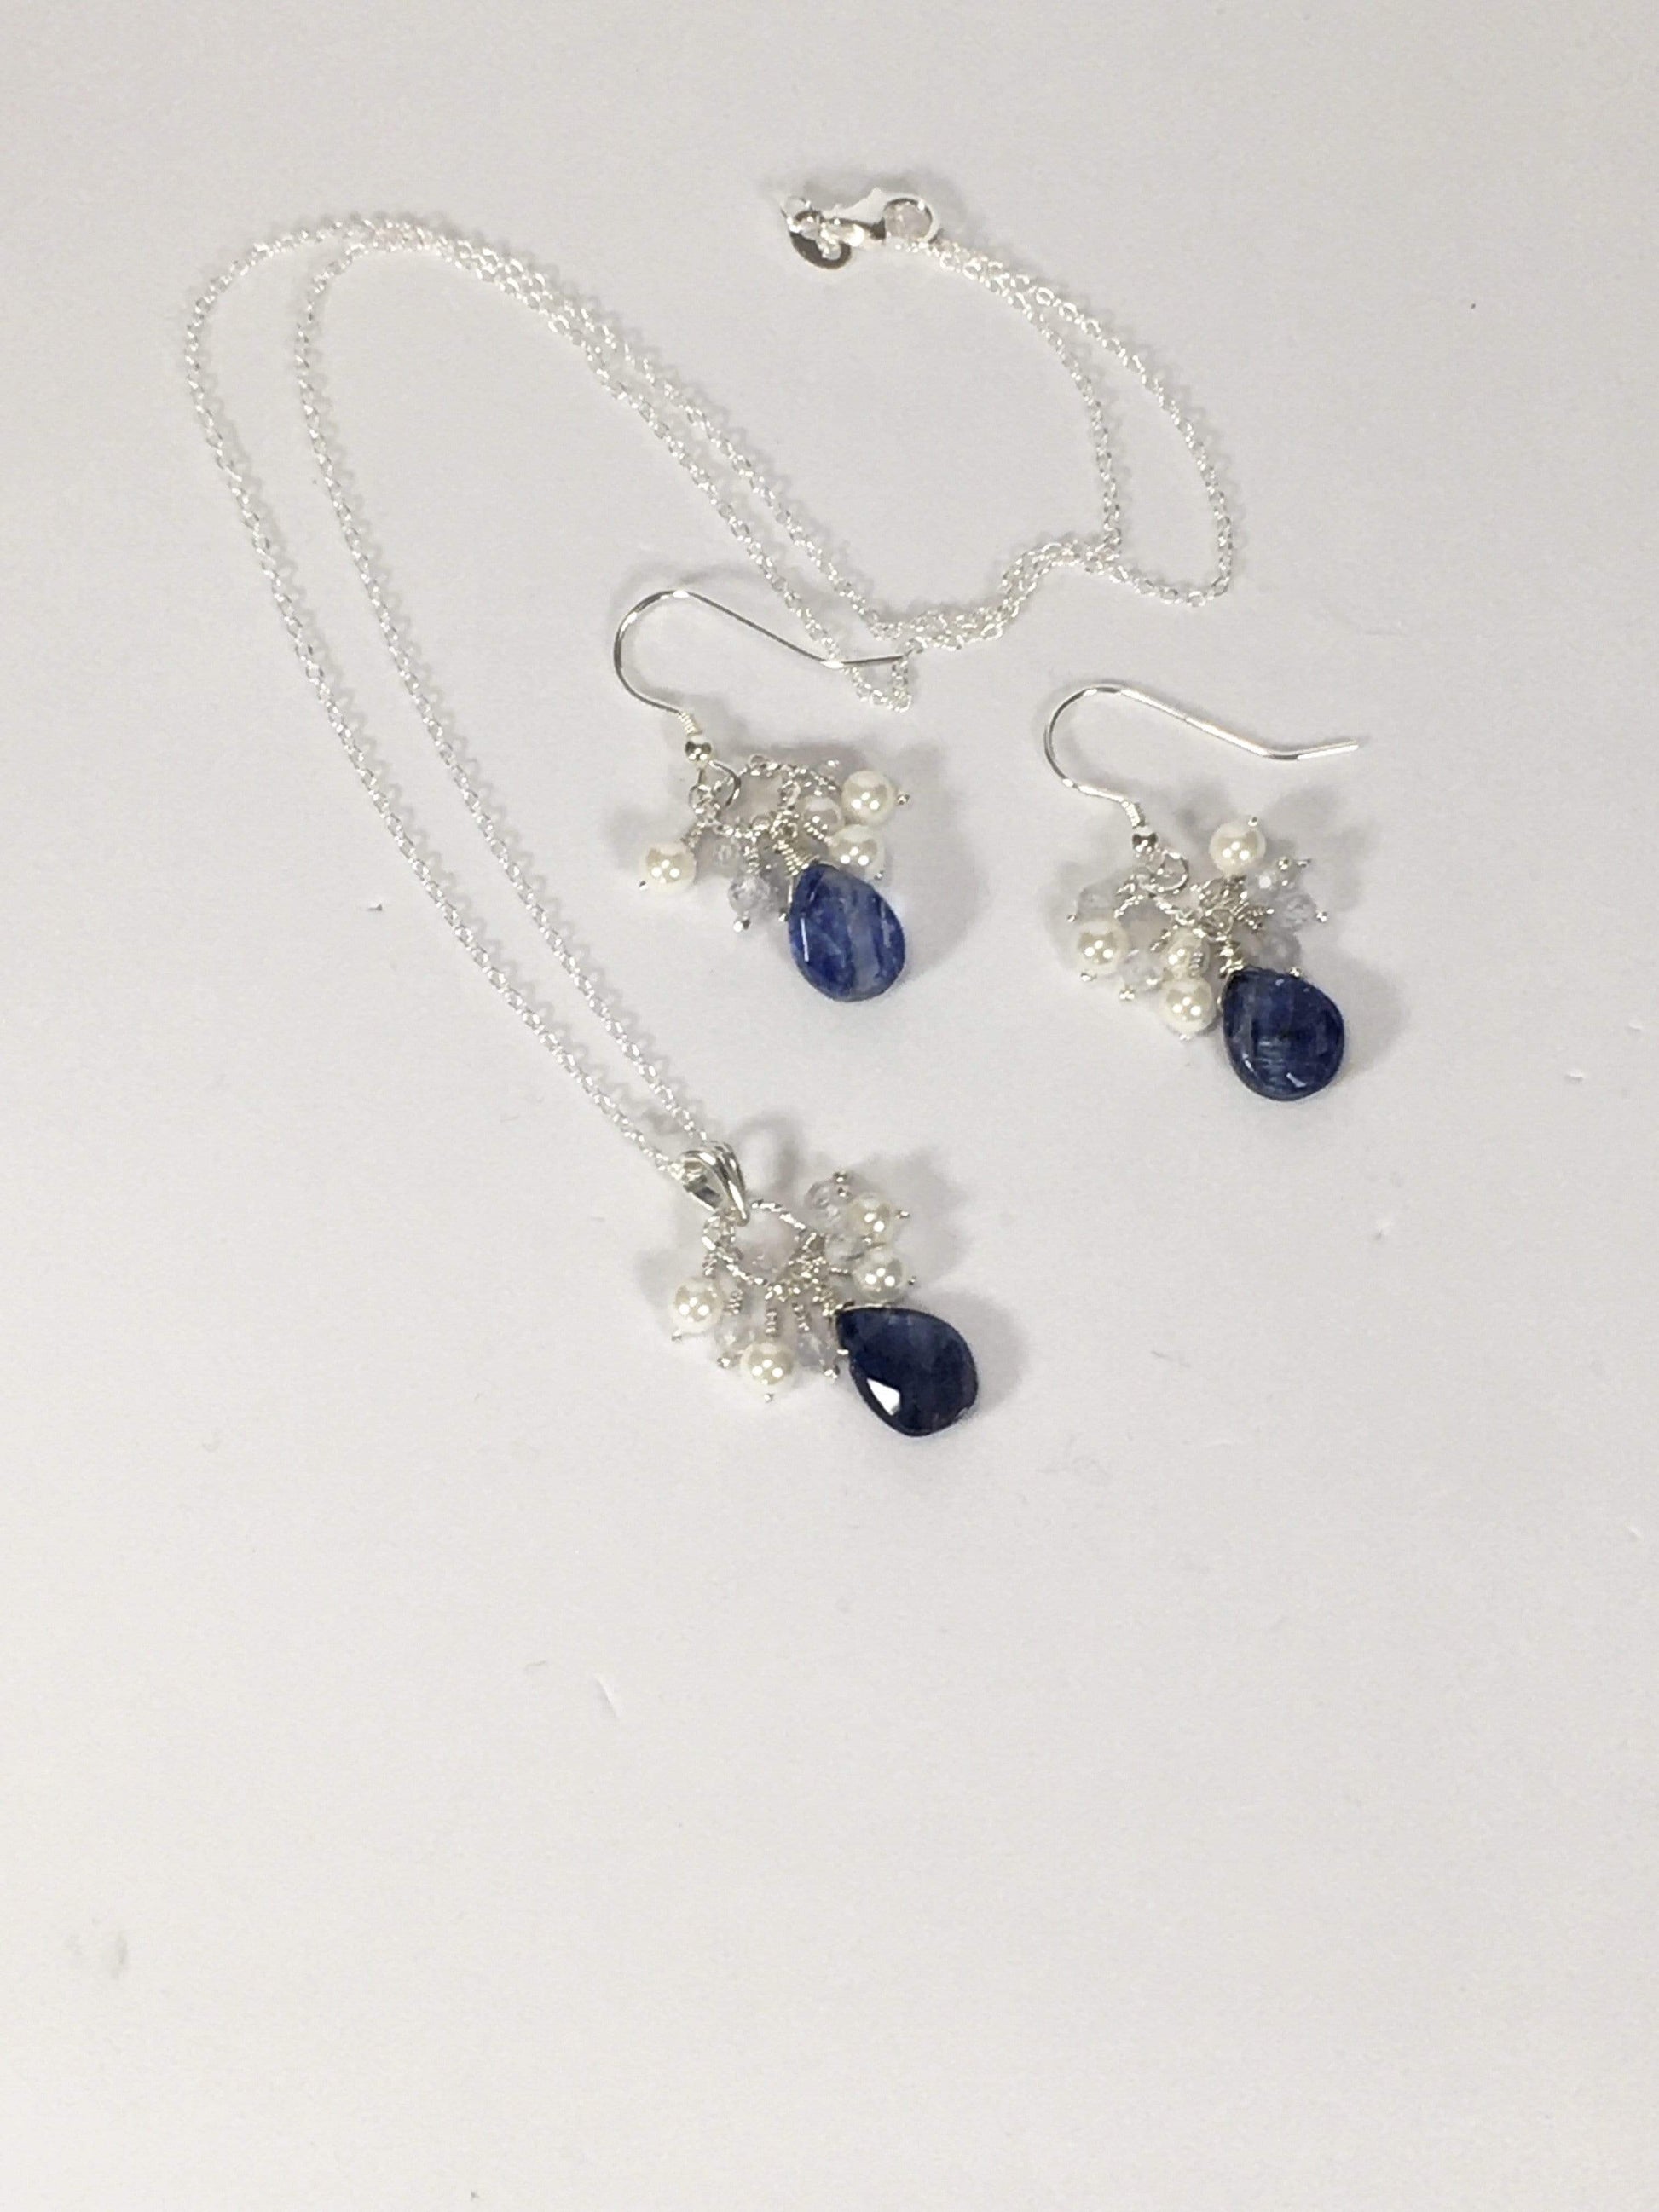 Necklace Kyanite And Zircon Cluster Necklace Set Jewelz Galore Kyanite And Zircon Cluster Necklace Set | Jewelz Galore | Jewellery